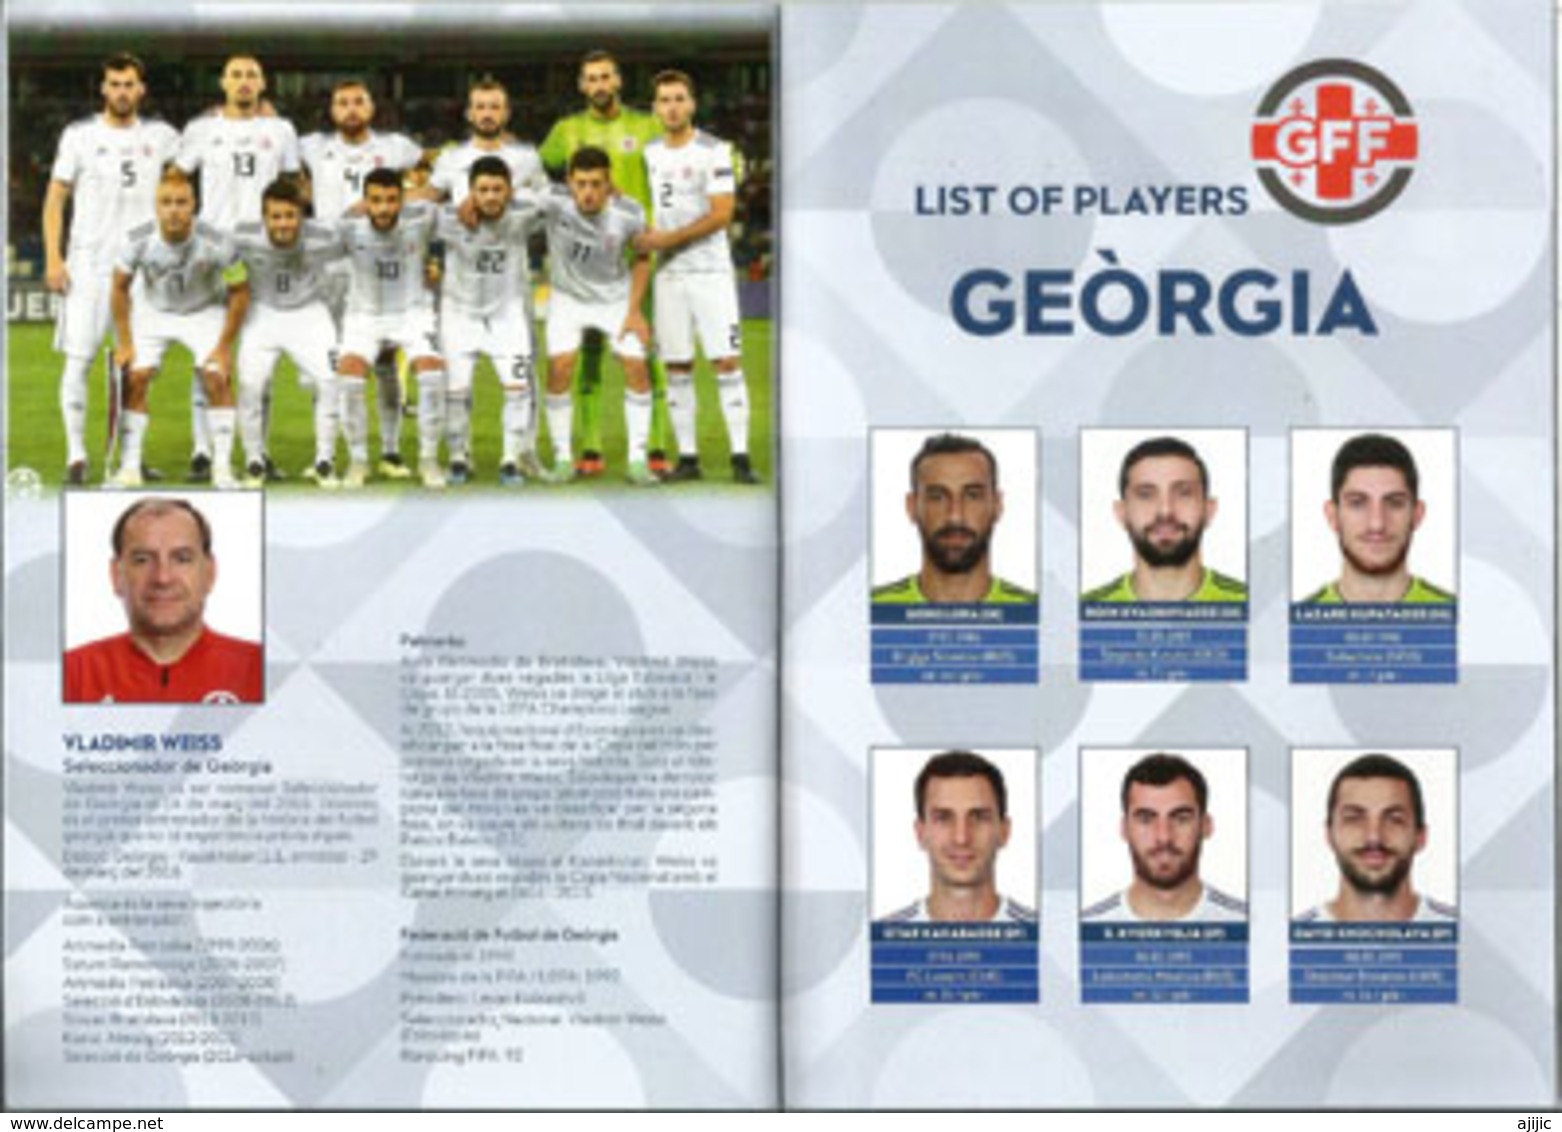 UEFA NATIONS LEAGUE 2018/19. ANDORRA-GEORGIA, BOOKLET 16 PAGES LUXE, Disponible Seuls Aux Tickets VIP.ONE AVAILABLE - Books